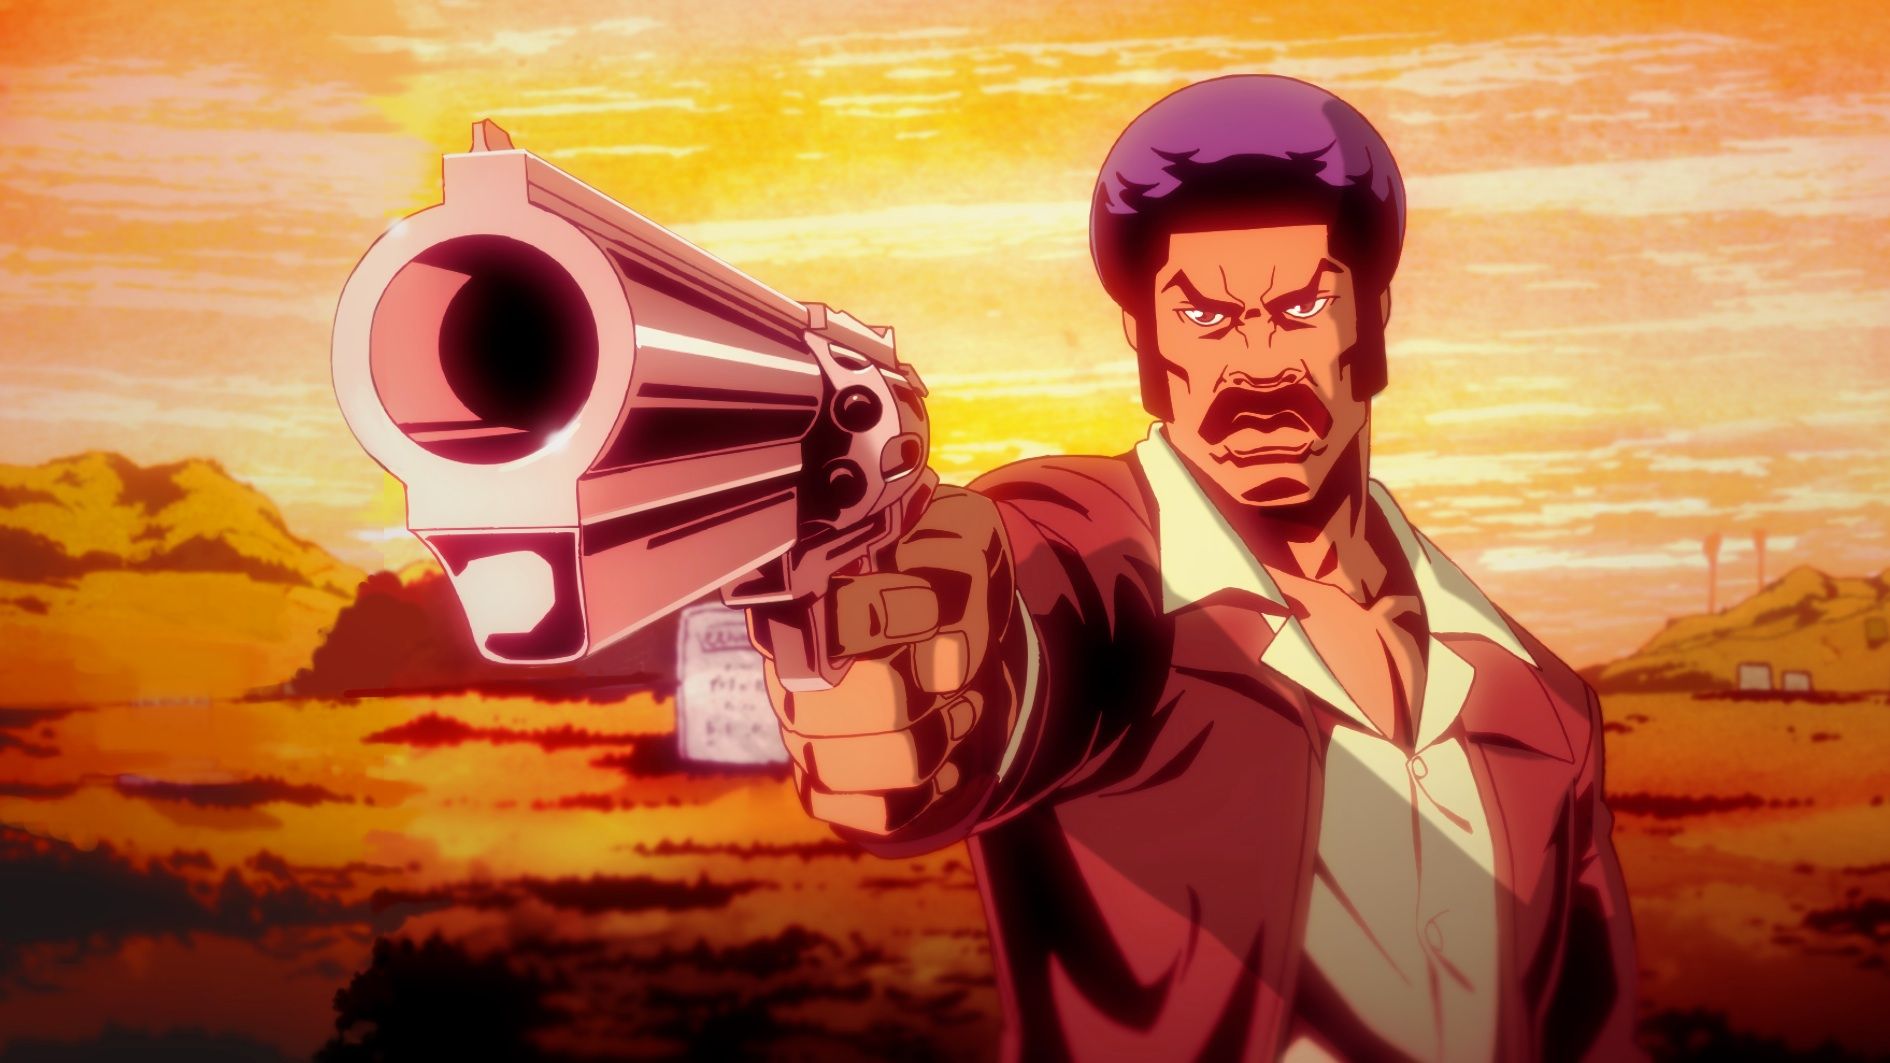 BLACK DYNAMITE Animated Series Trailer, Posters, and Image 